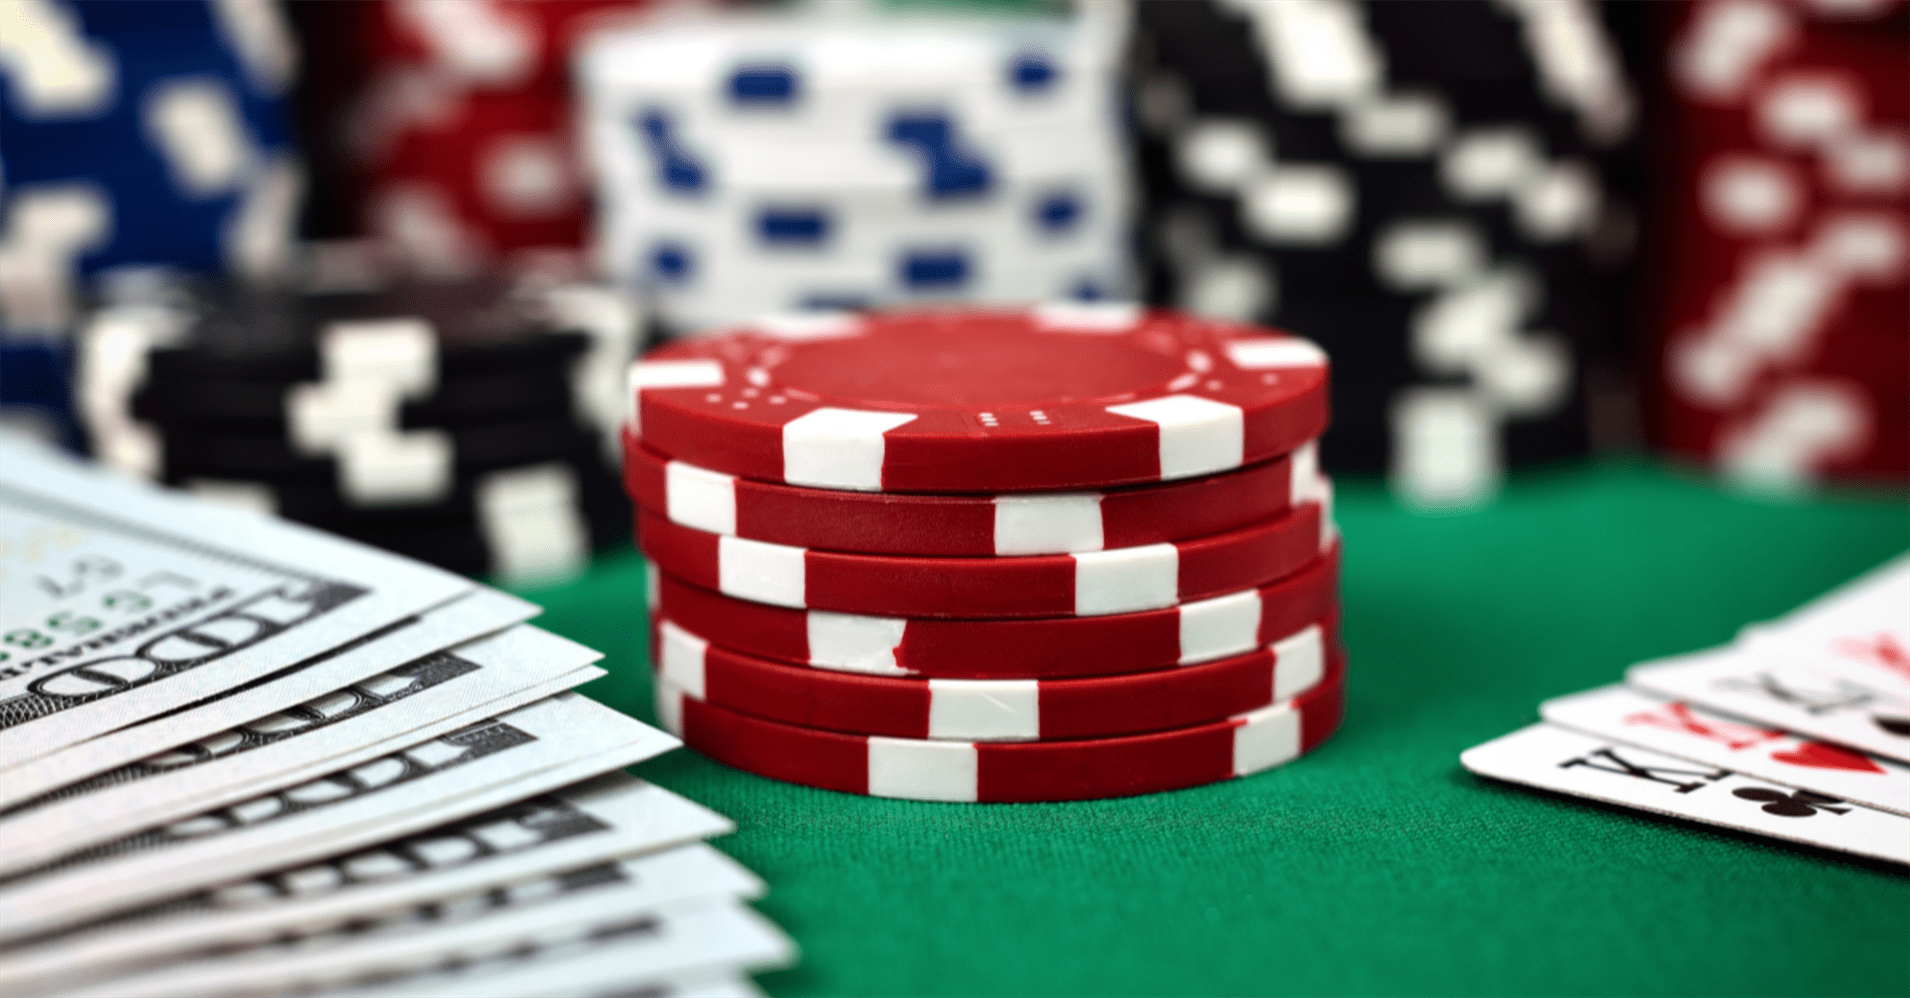 Thrill and Skill: The World of Free Online Poker Explored